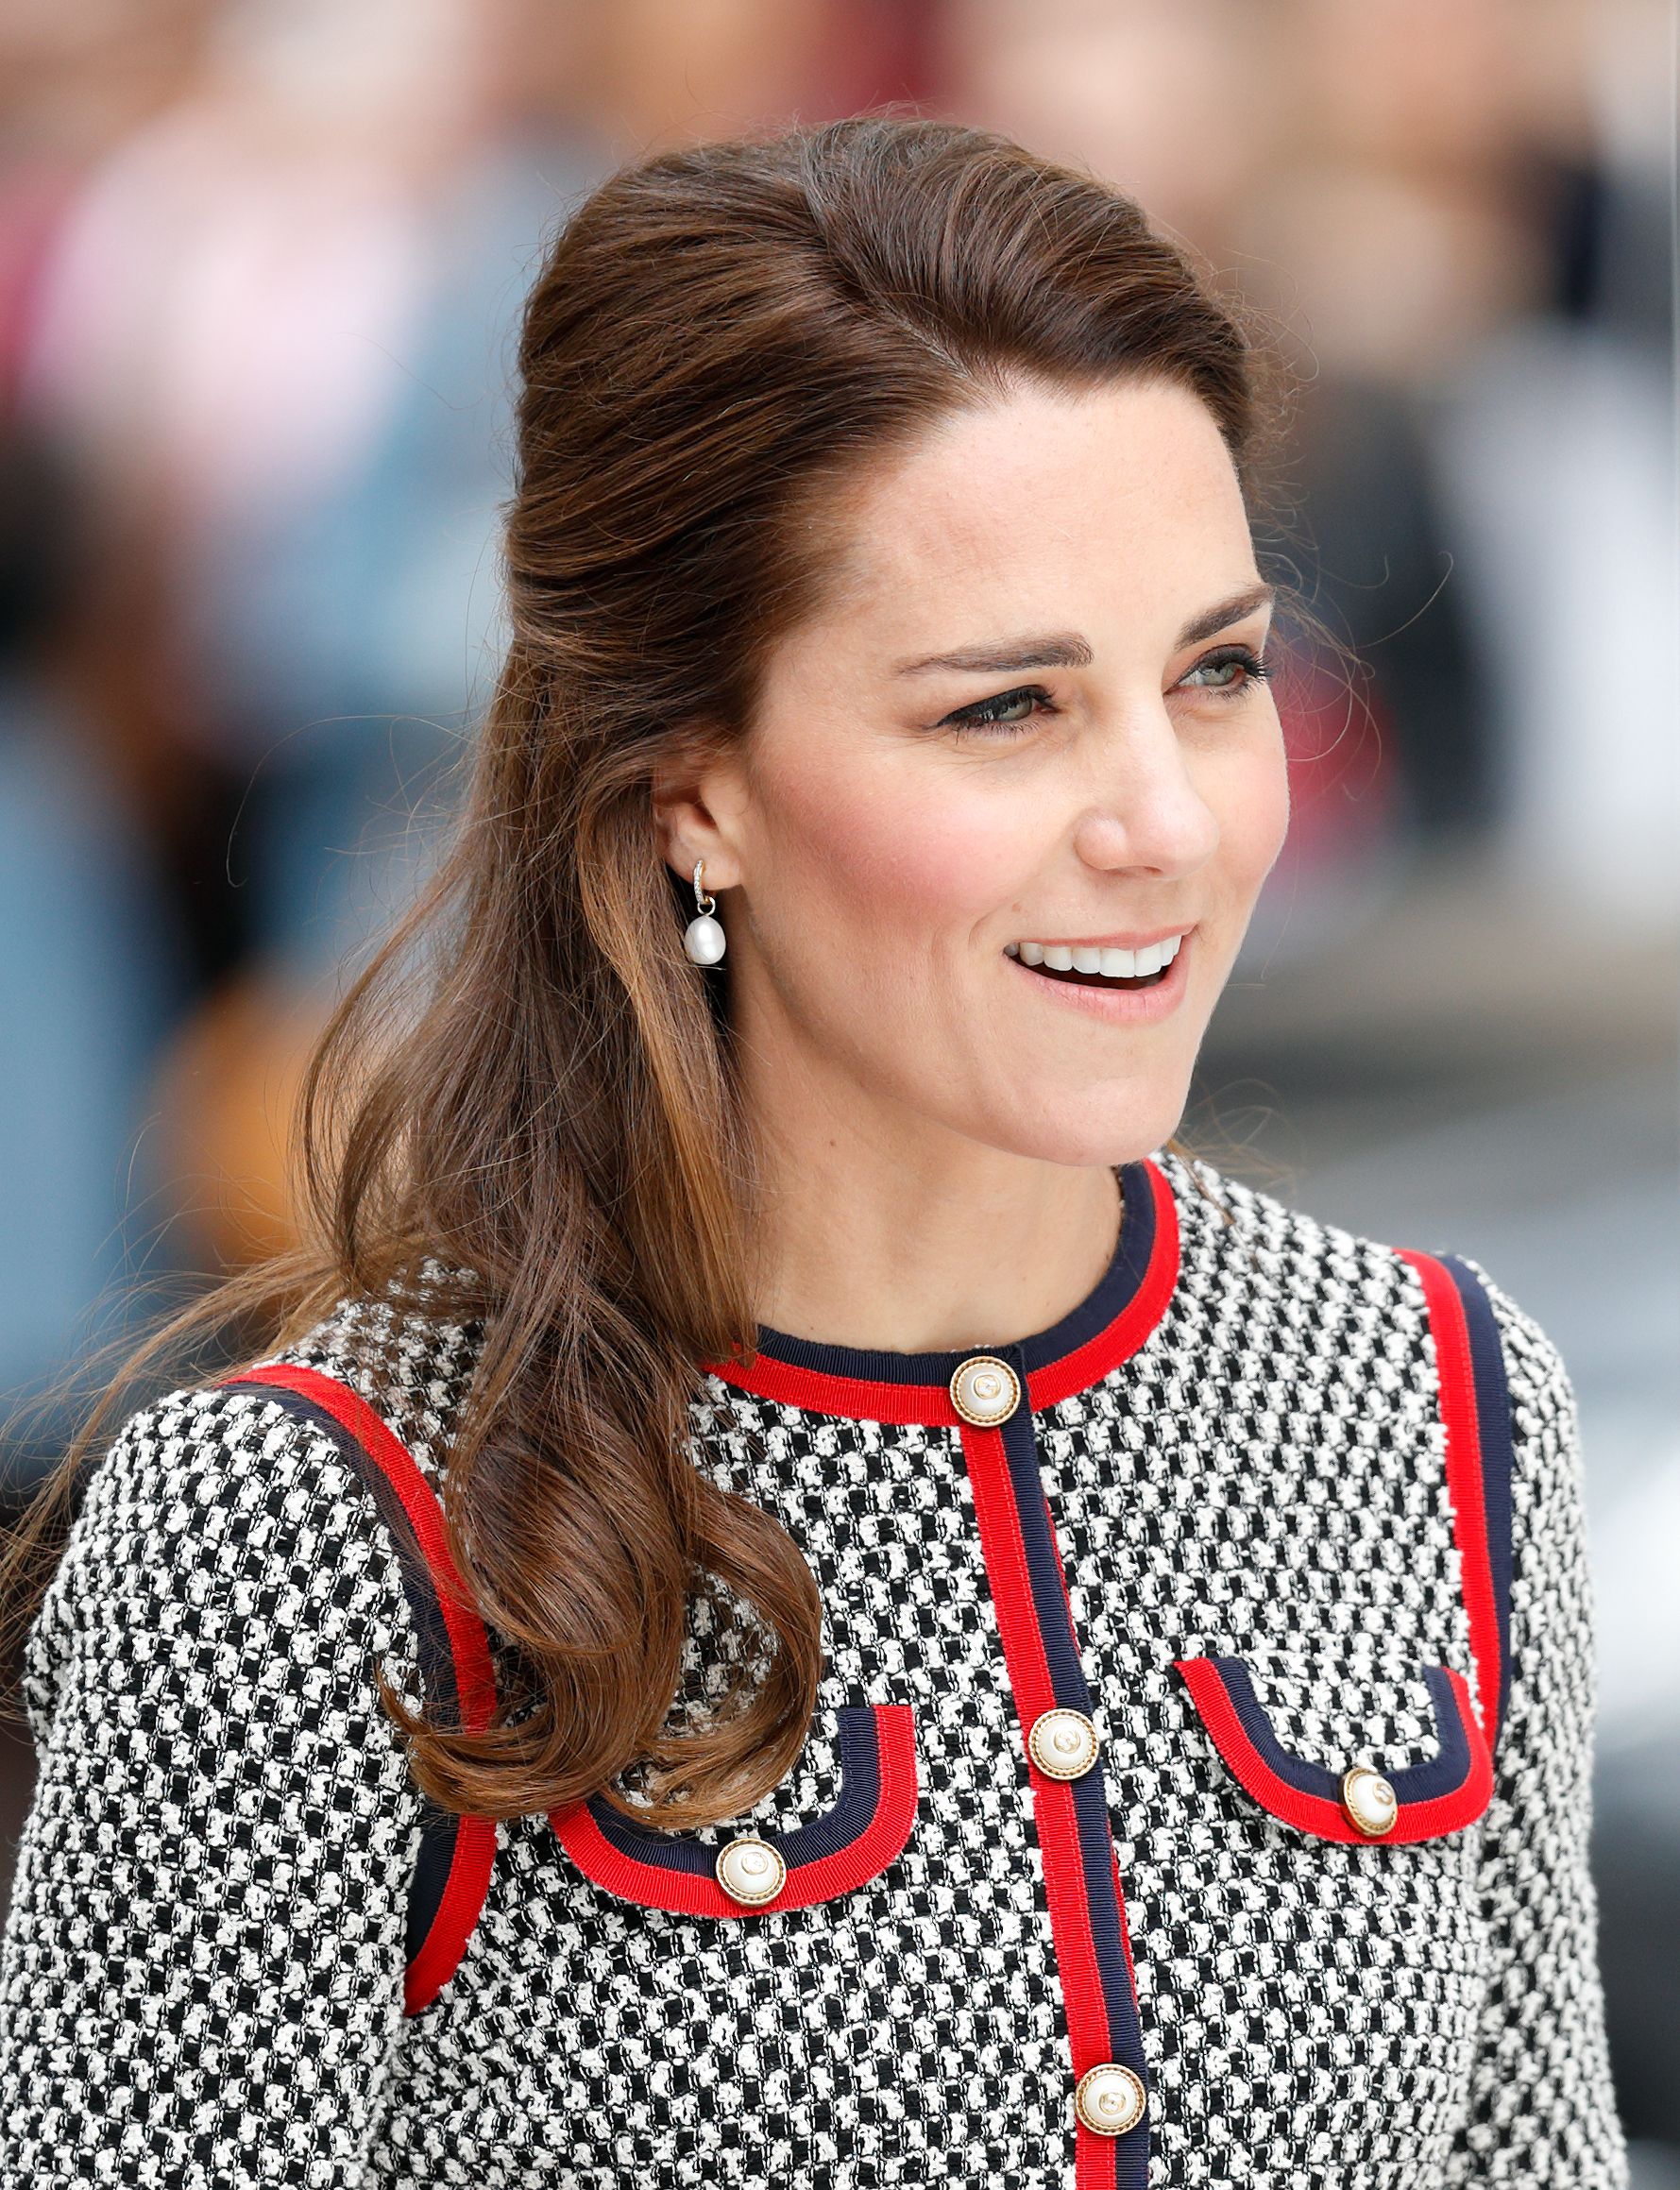 The Duchess of Cambridge visits the new V & A exhibition area